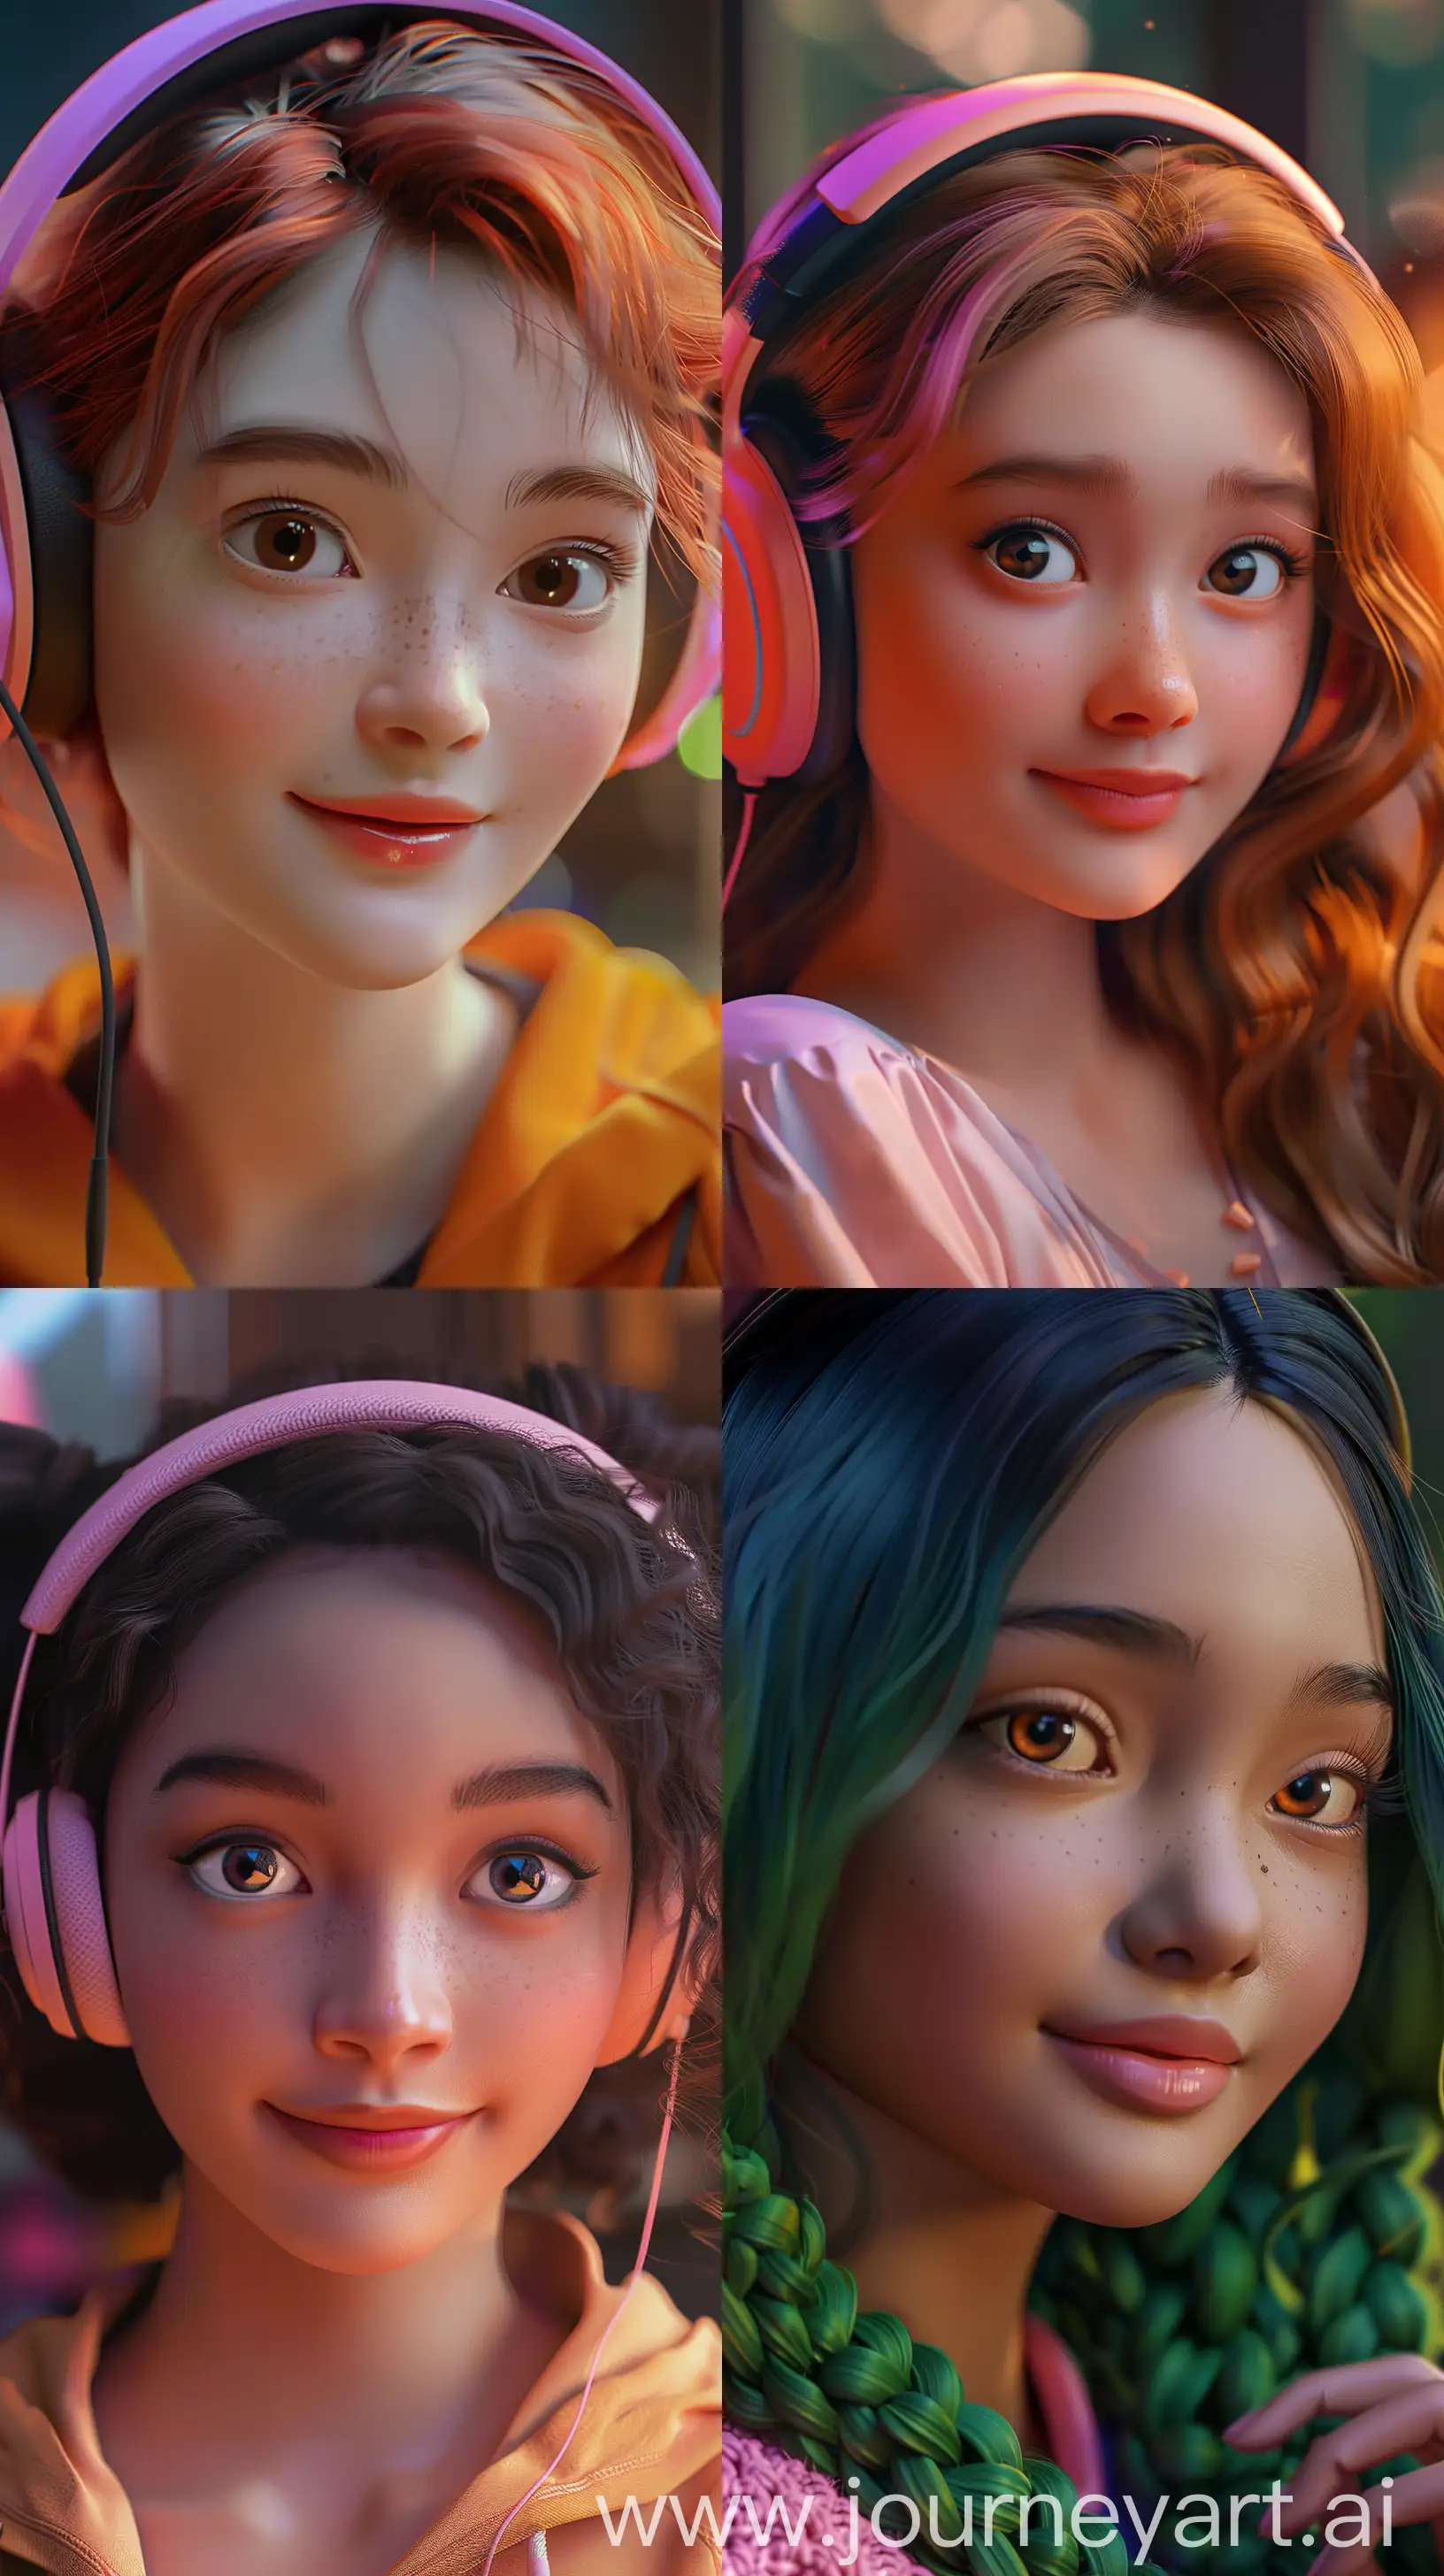 Happy-Family-Portrait-in-Disney-Pixar-Style-Smiling-Faces-in-Sharp-Focus-and-HyperRealistic-Detail